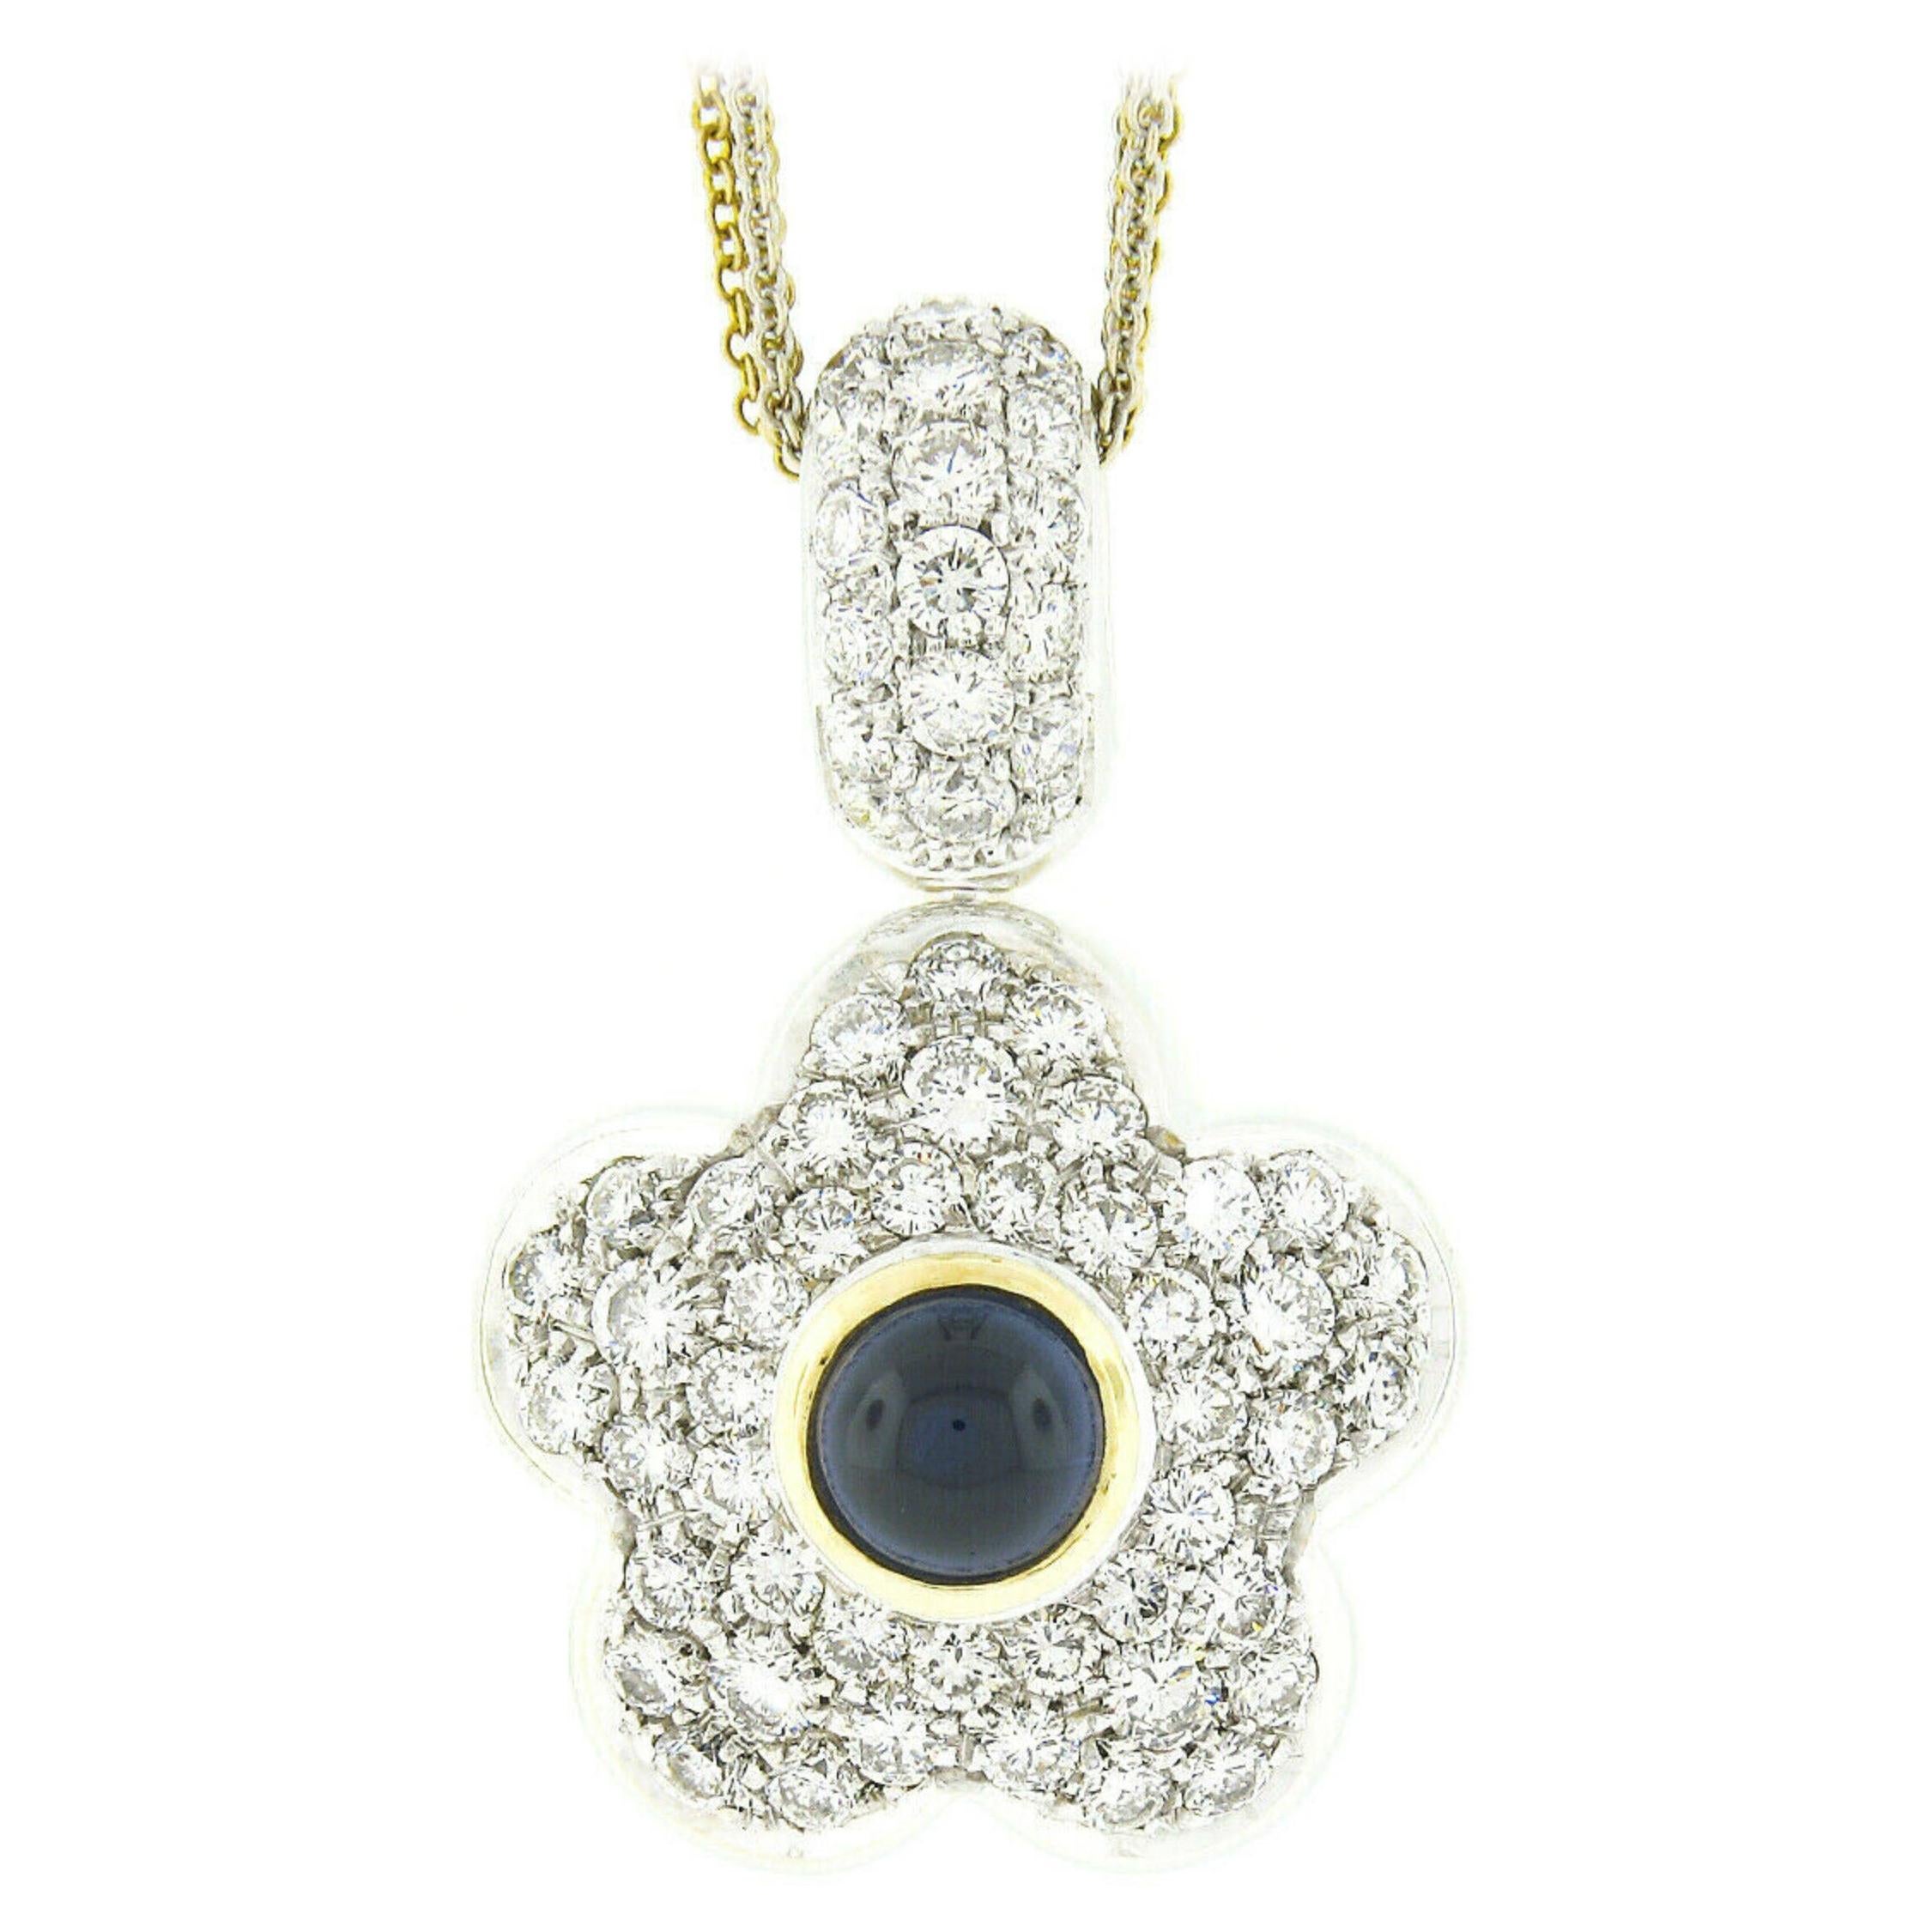 Reversible Two Tone 18k Gold Diamond & Sapphire Puffed Flower Pendant Necklace